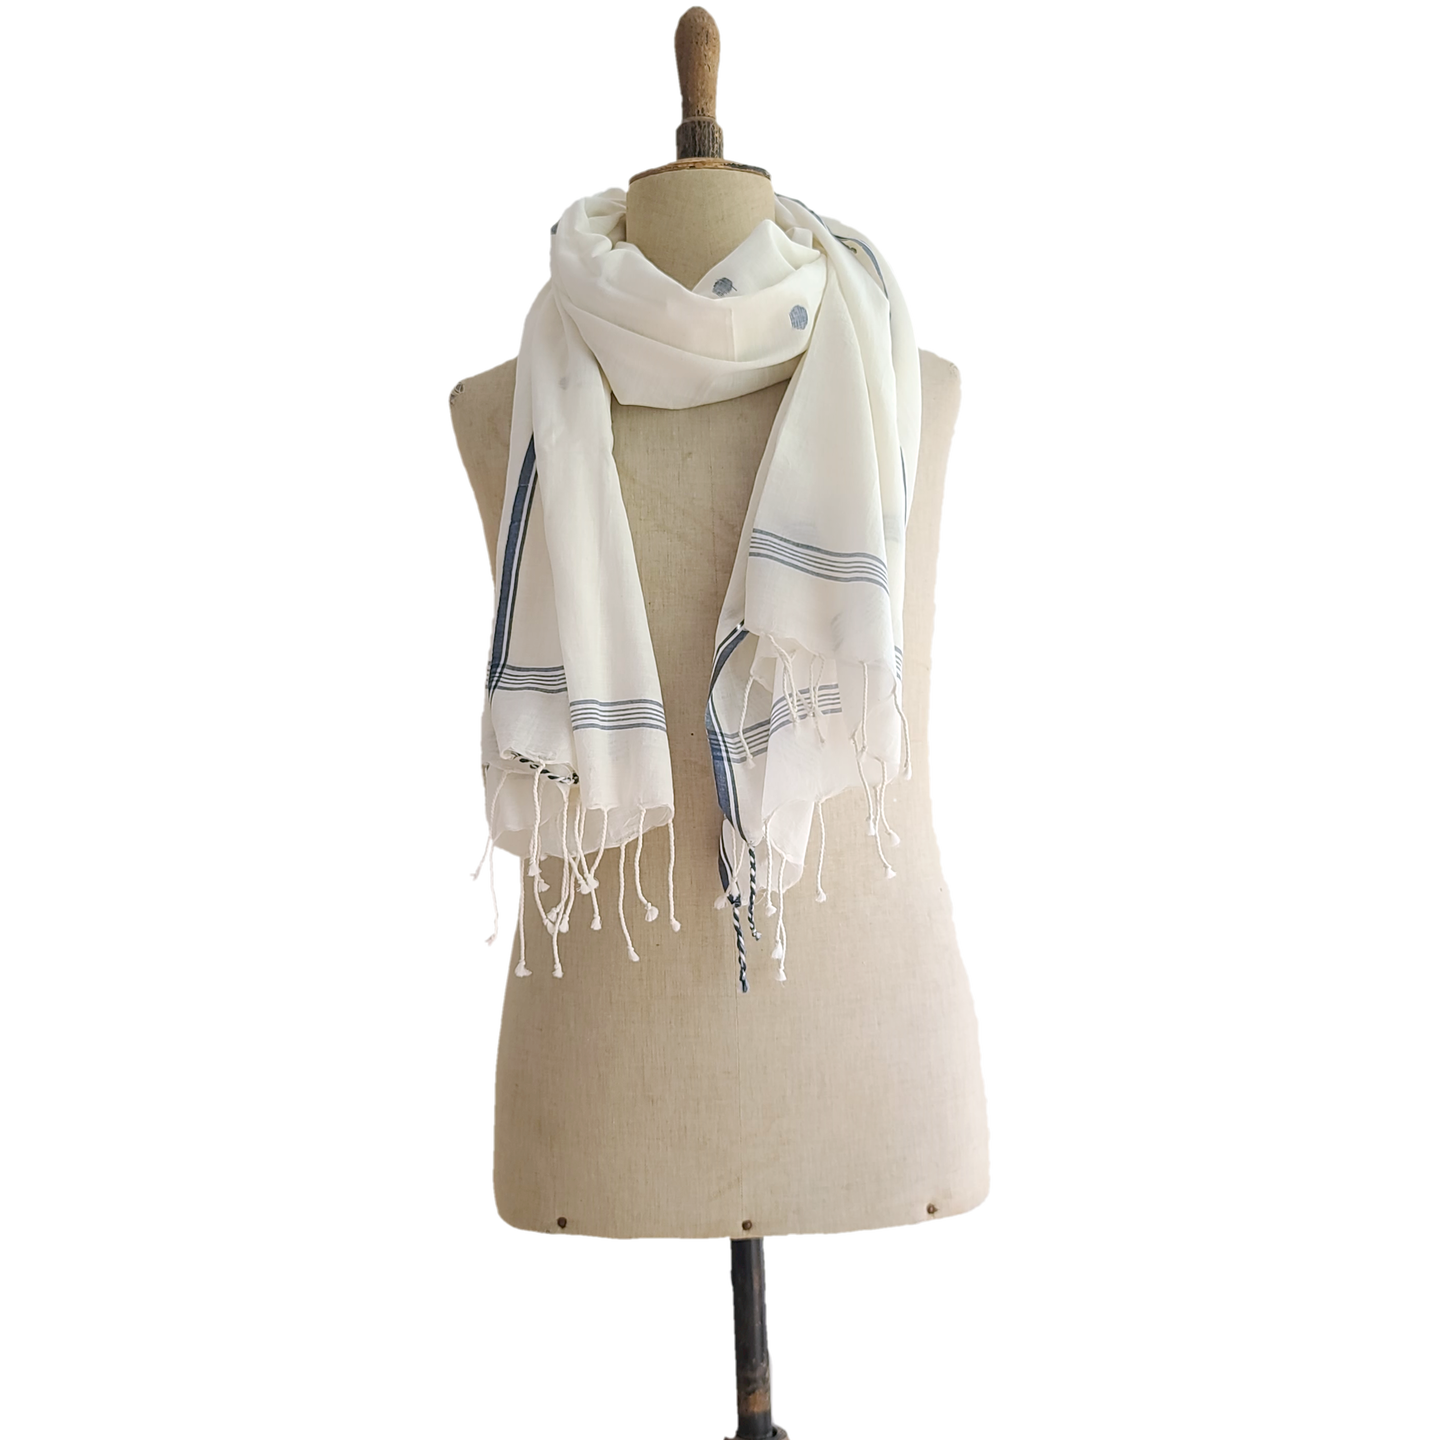 Finest Cotton scarf - off white with embroidered blue pattern